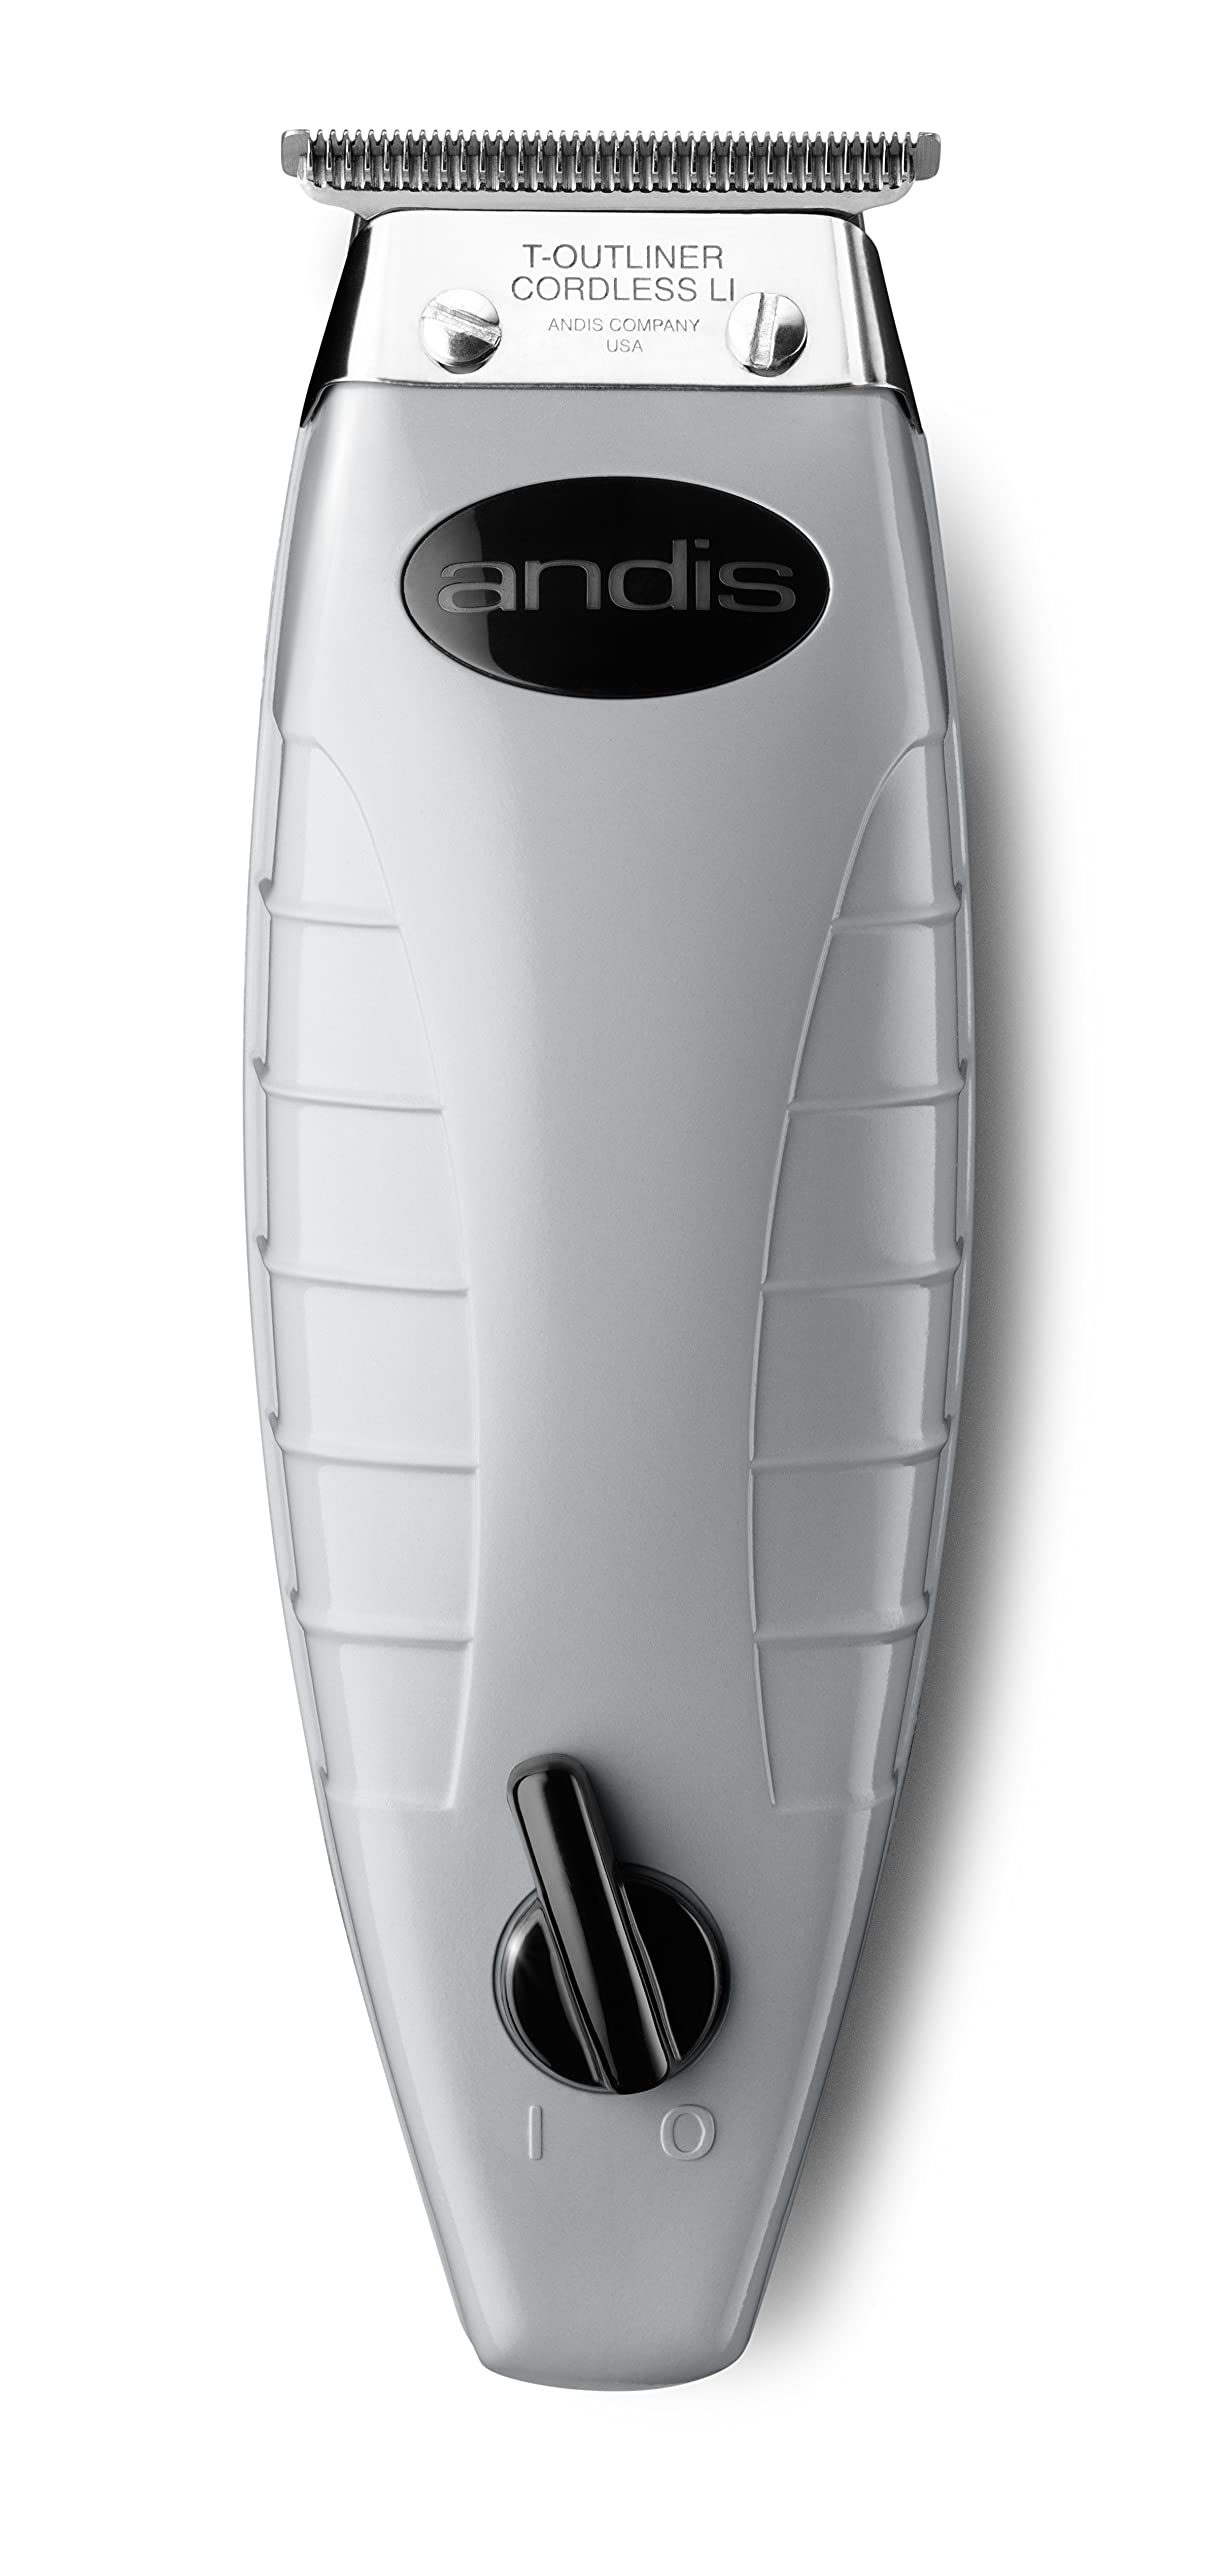 Andis 74000 Professional Corded/ Cordless Hair & Beard Trimmer, T-Outliner Blade Trimmer, Zero Gapped, Close Cutting Carbon Steel T-Blade Trimmer, Grey